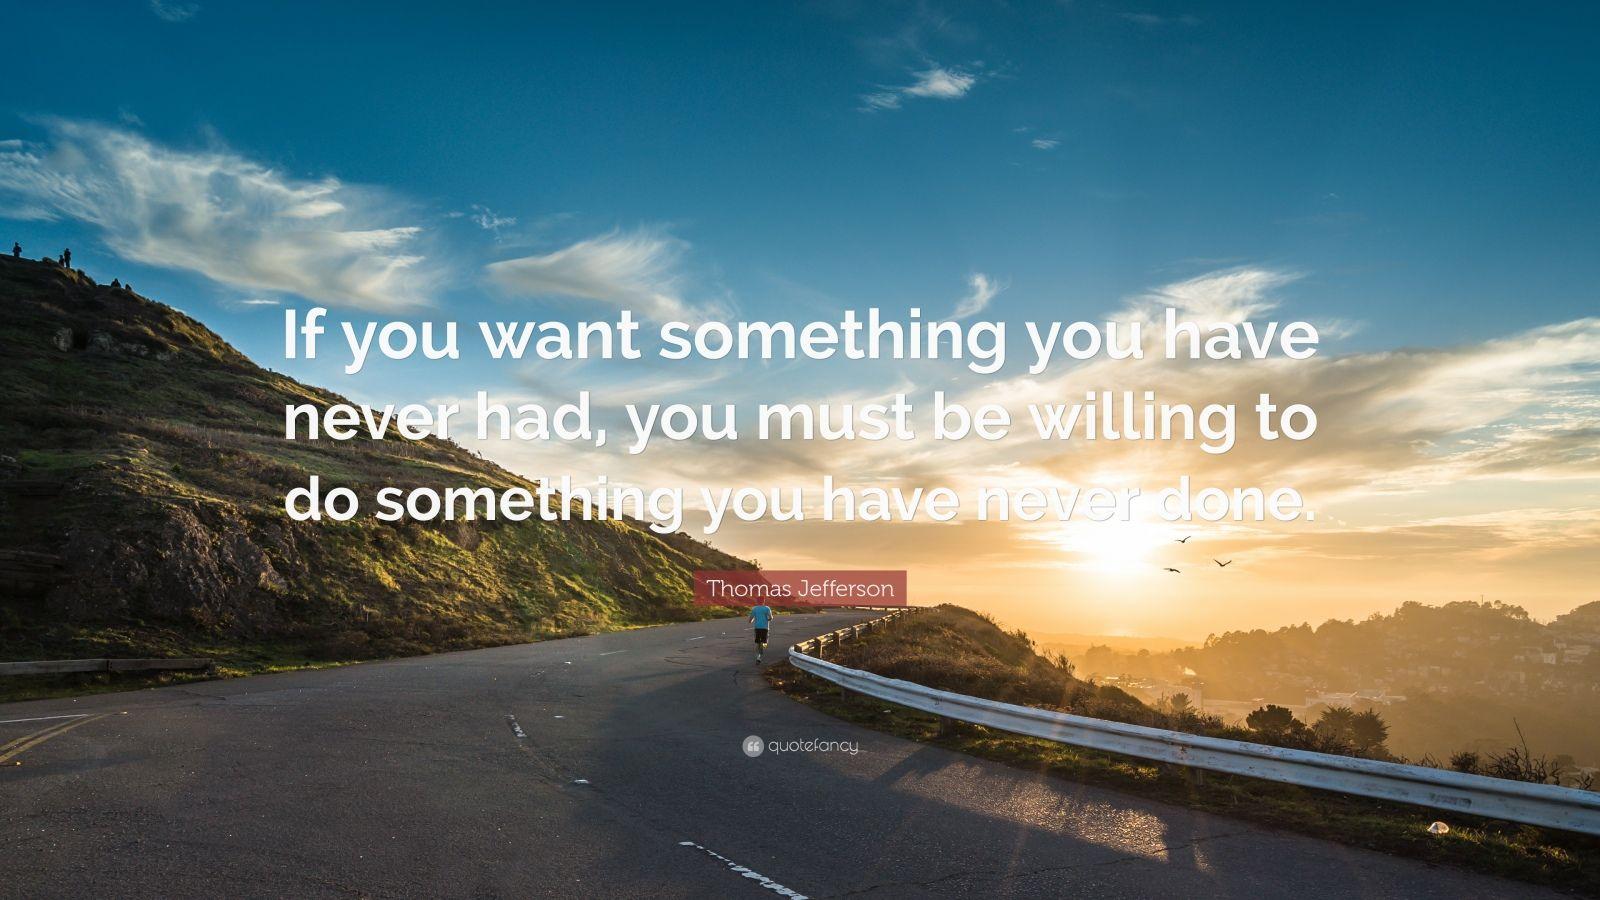 dual screen monitor wallpaper 3840×1080 inspirational about